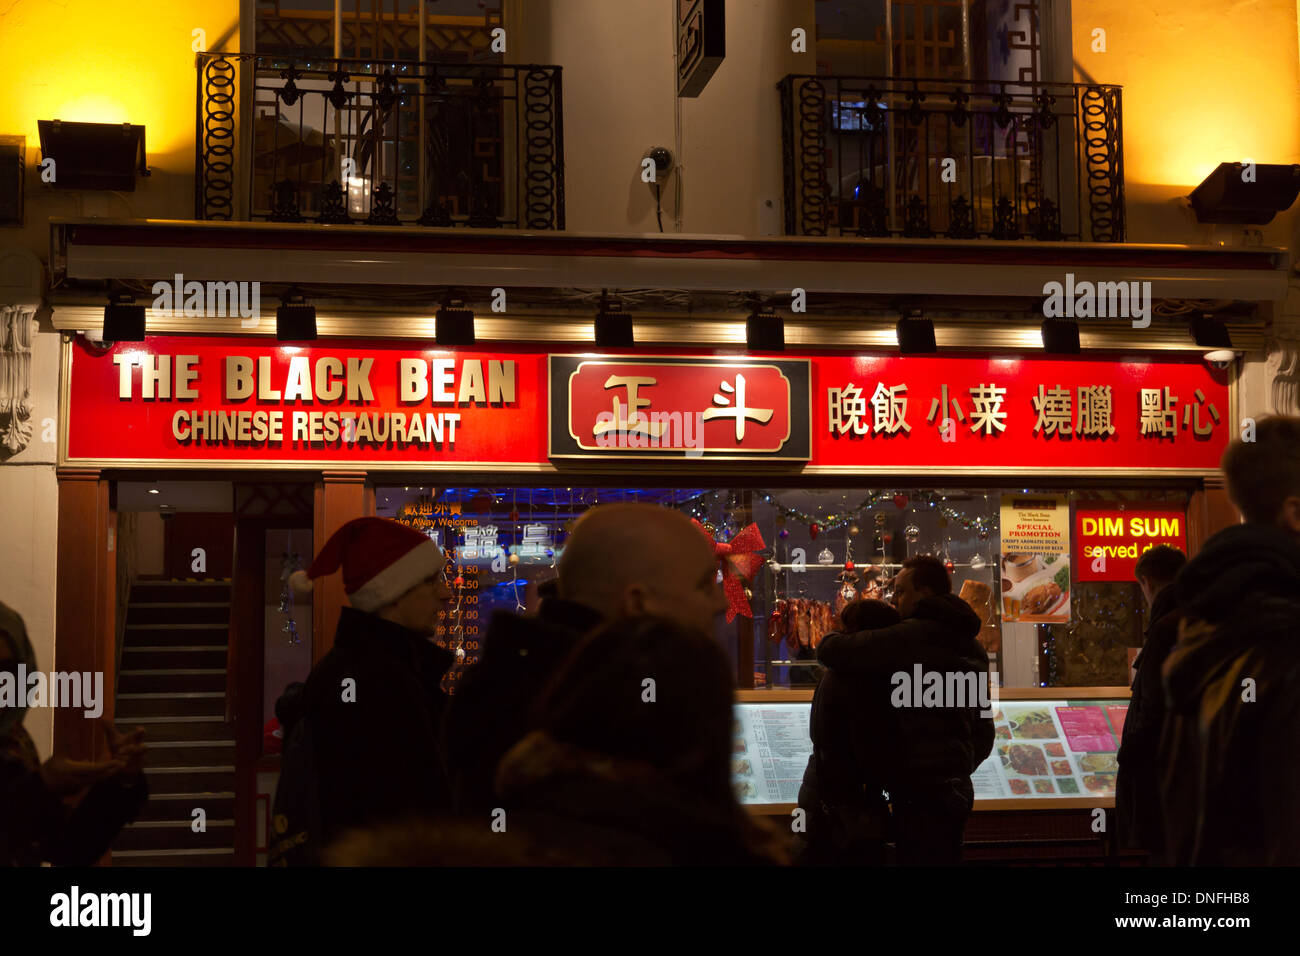 The Black Bean Chinese Restaurant in London Chinatown, England Stock Photo